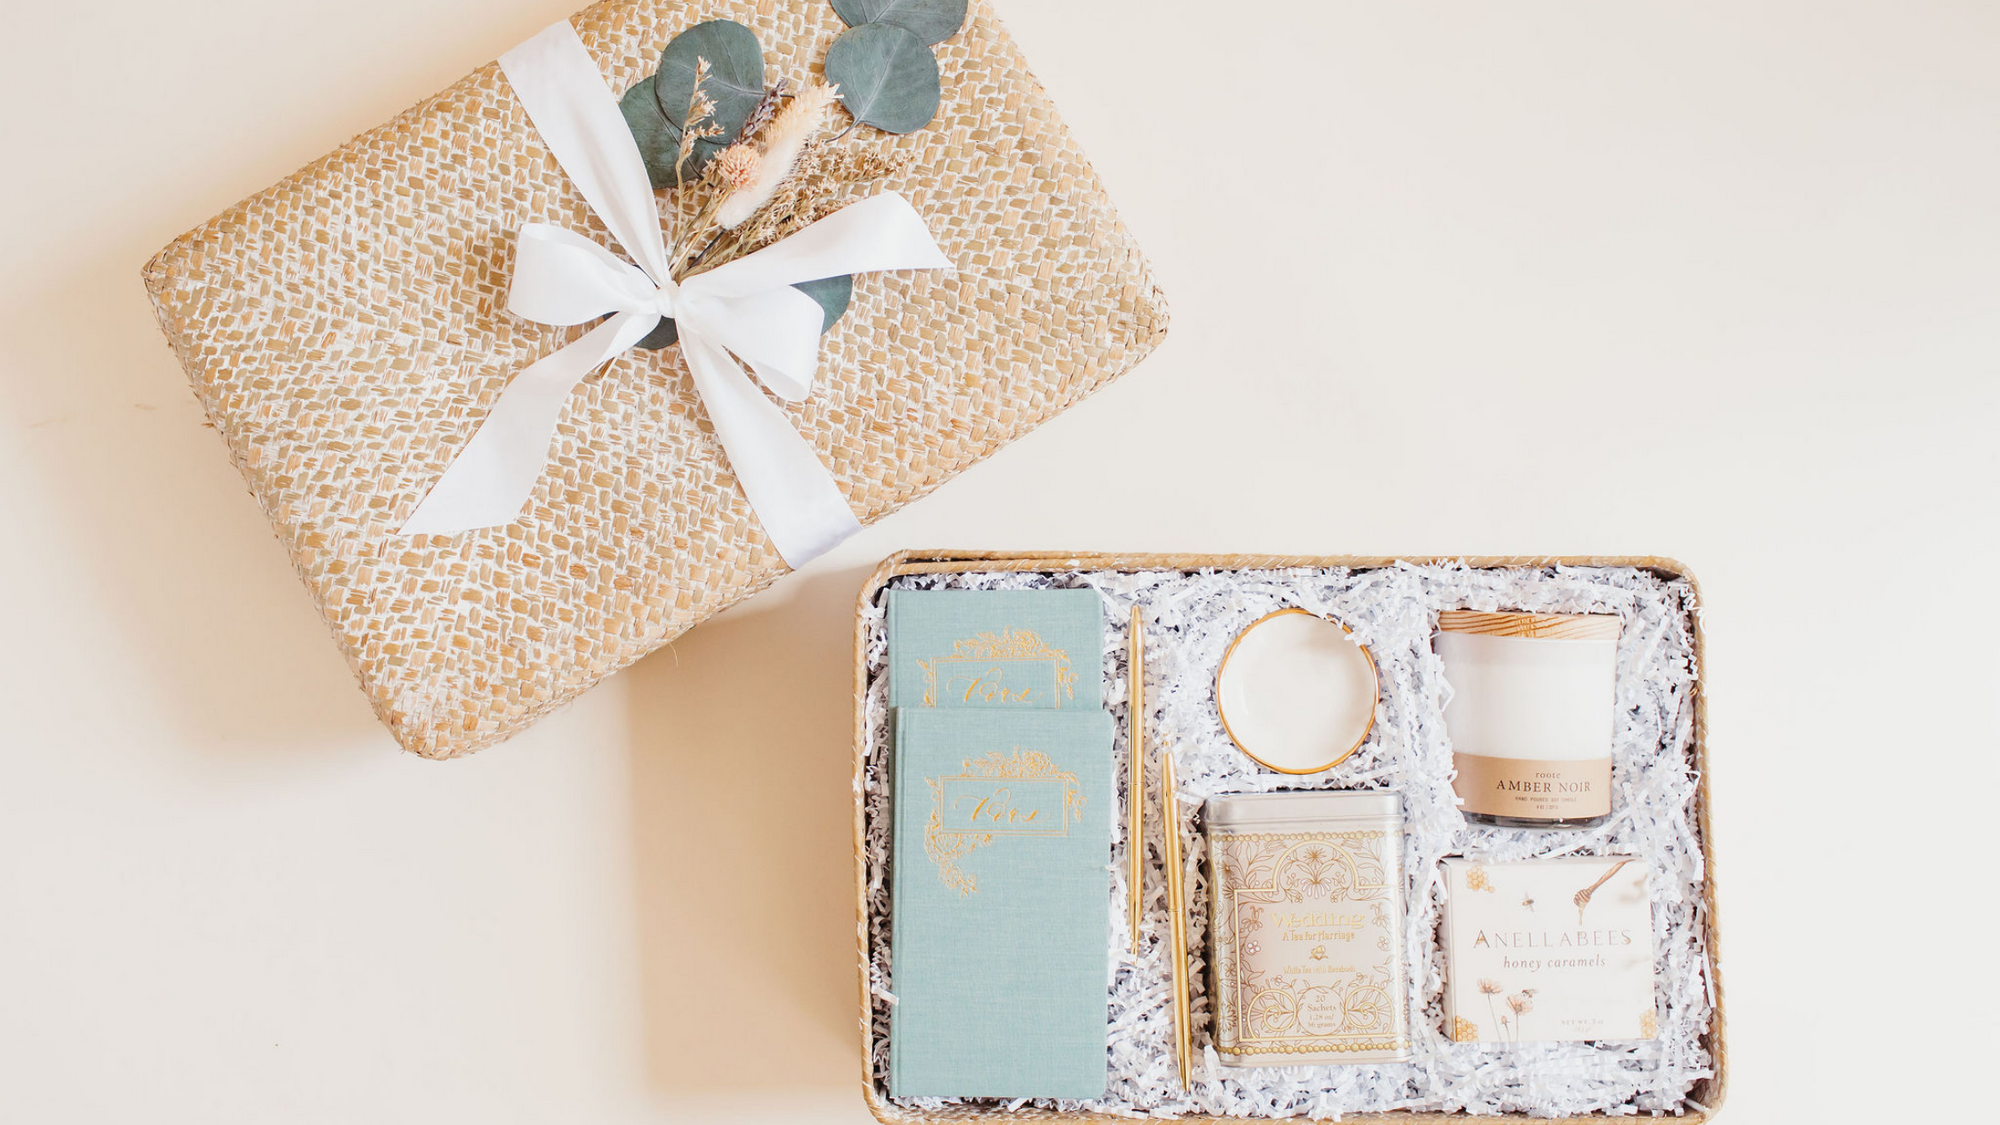 Top 6 Best Selling Wedding Client Gifts